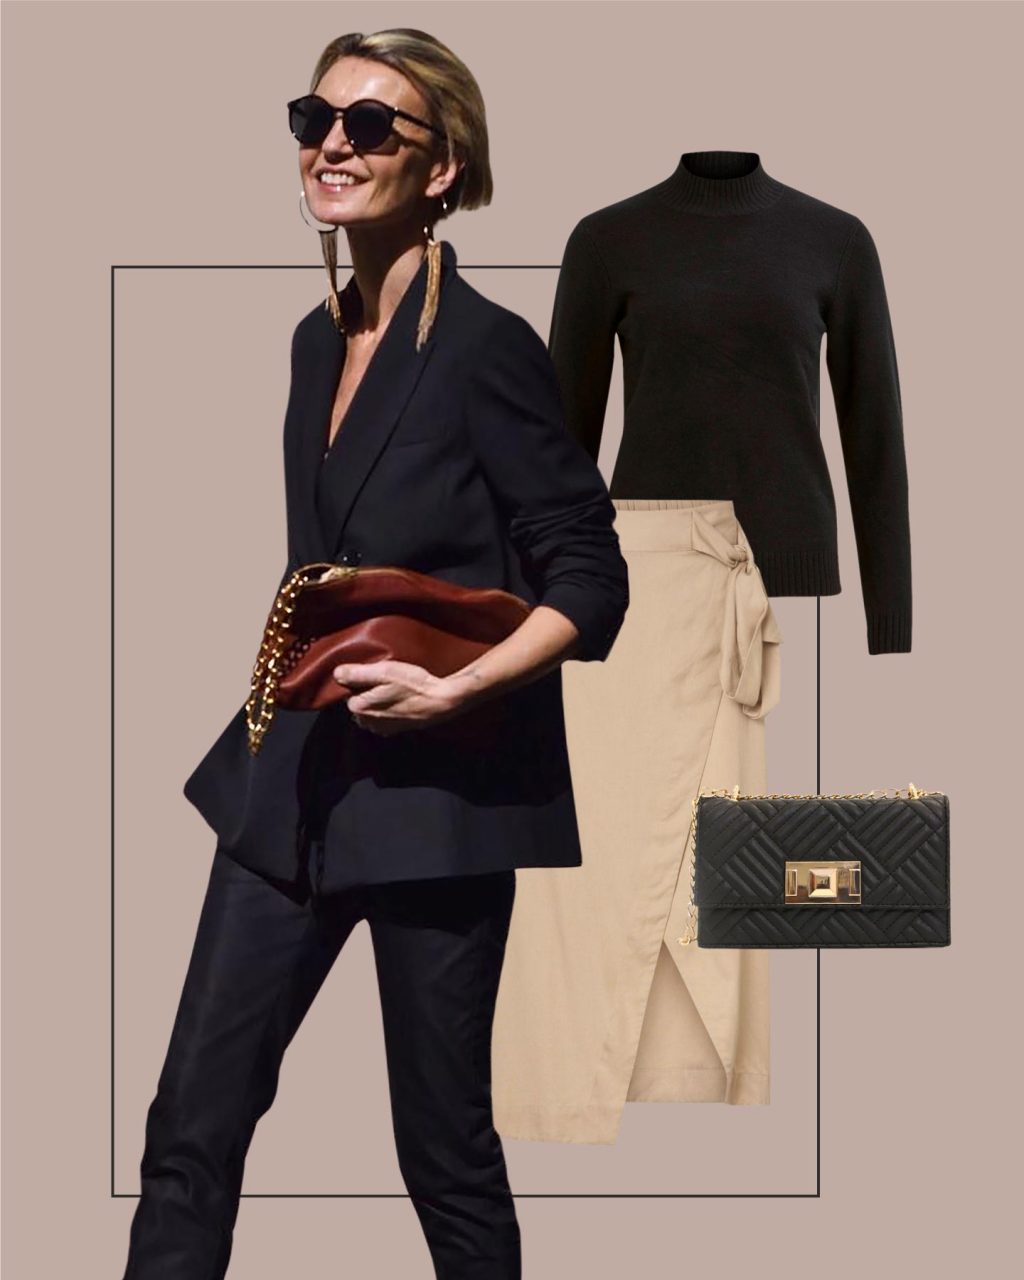 classy business outfits for women over 40 - work wardrobe capsule